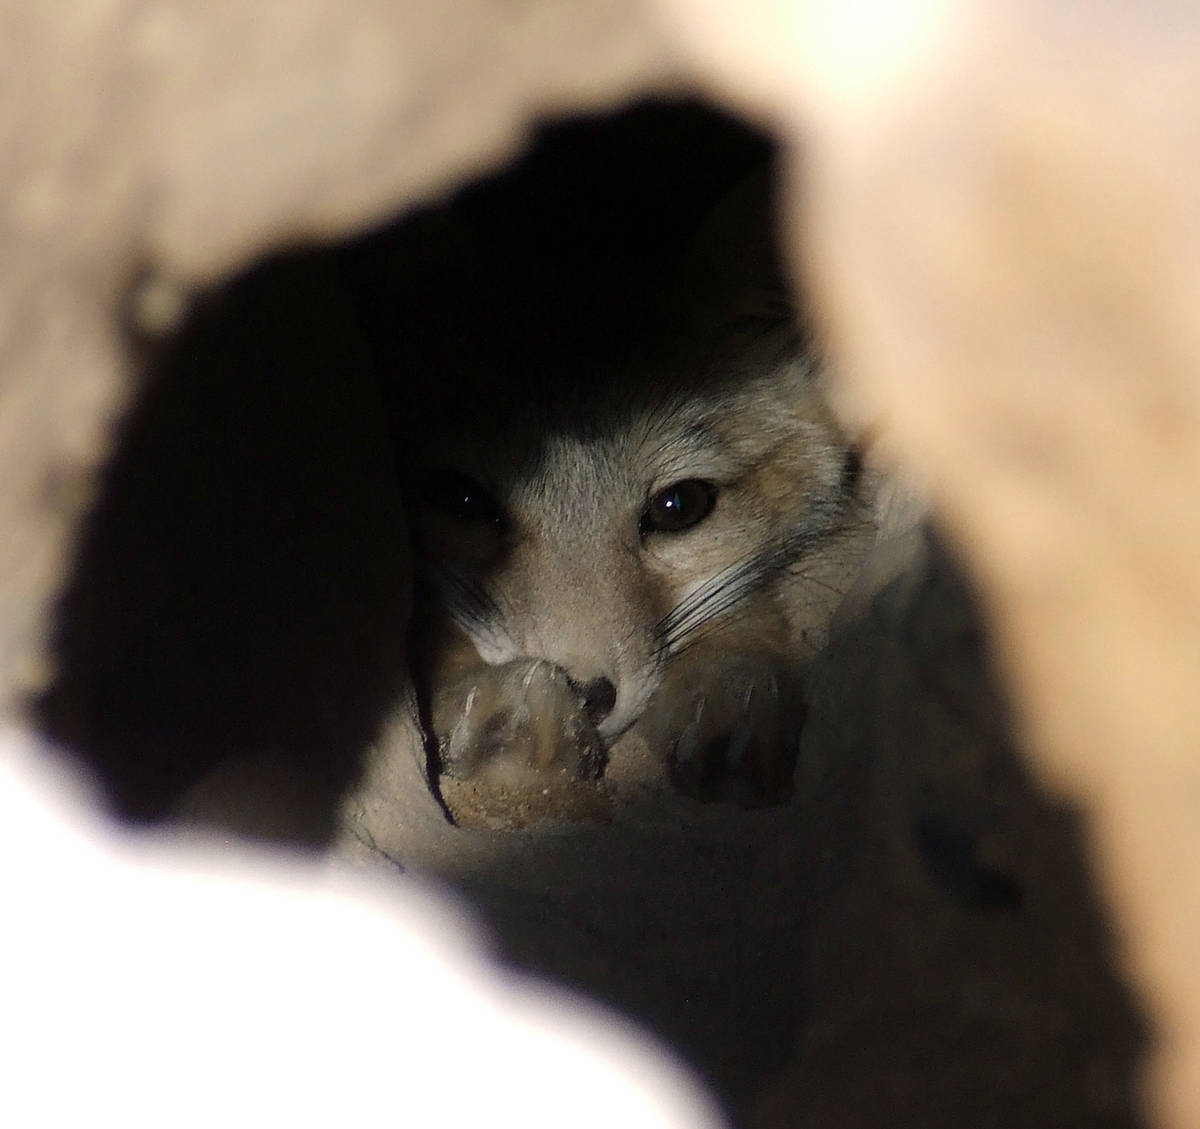 Bio Logical A kit fox hunkers down in a den at a desert construction site.